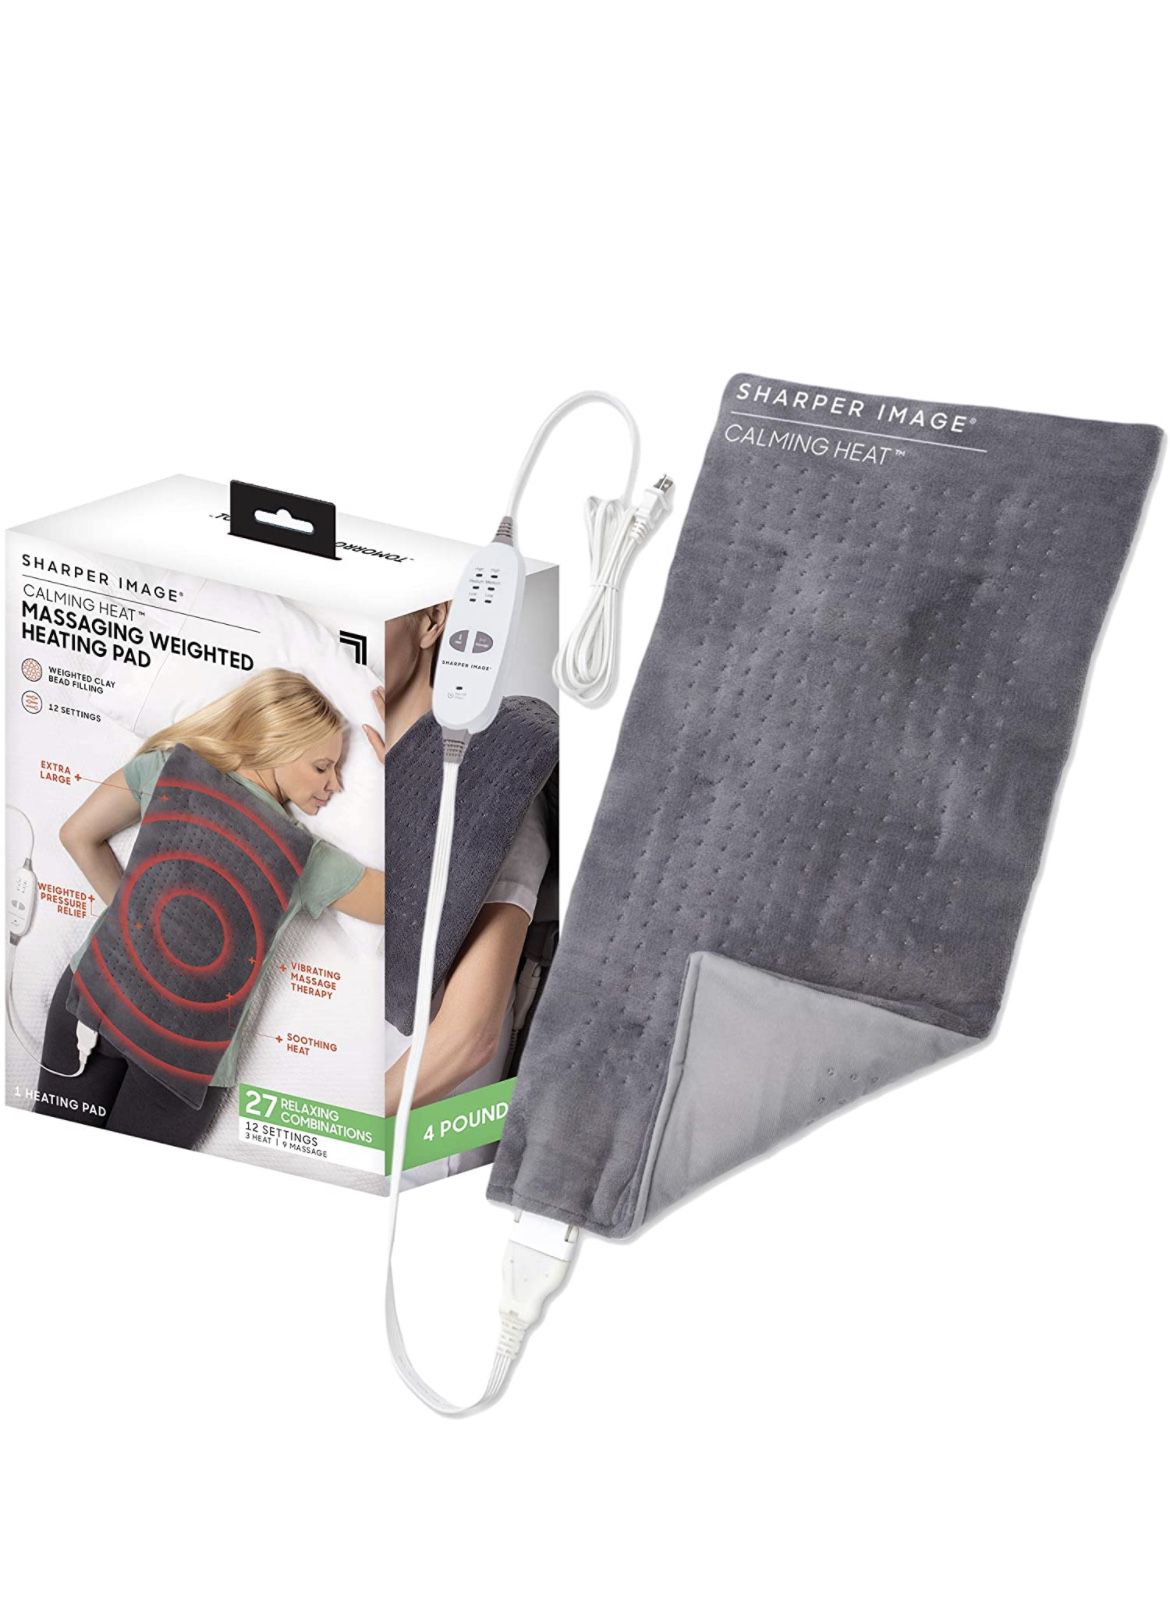 Calming Heat Massaging Weighted Heating Pad by Sharper Image- Electric Heating Pad with Massaging Vibrations, Auto-Off,12 Settings- 3 Heat, 9 Massage-